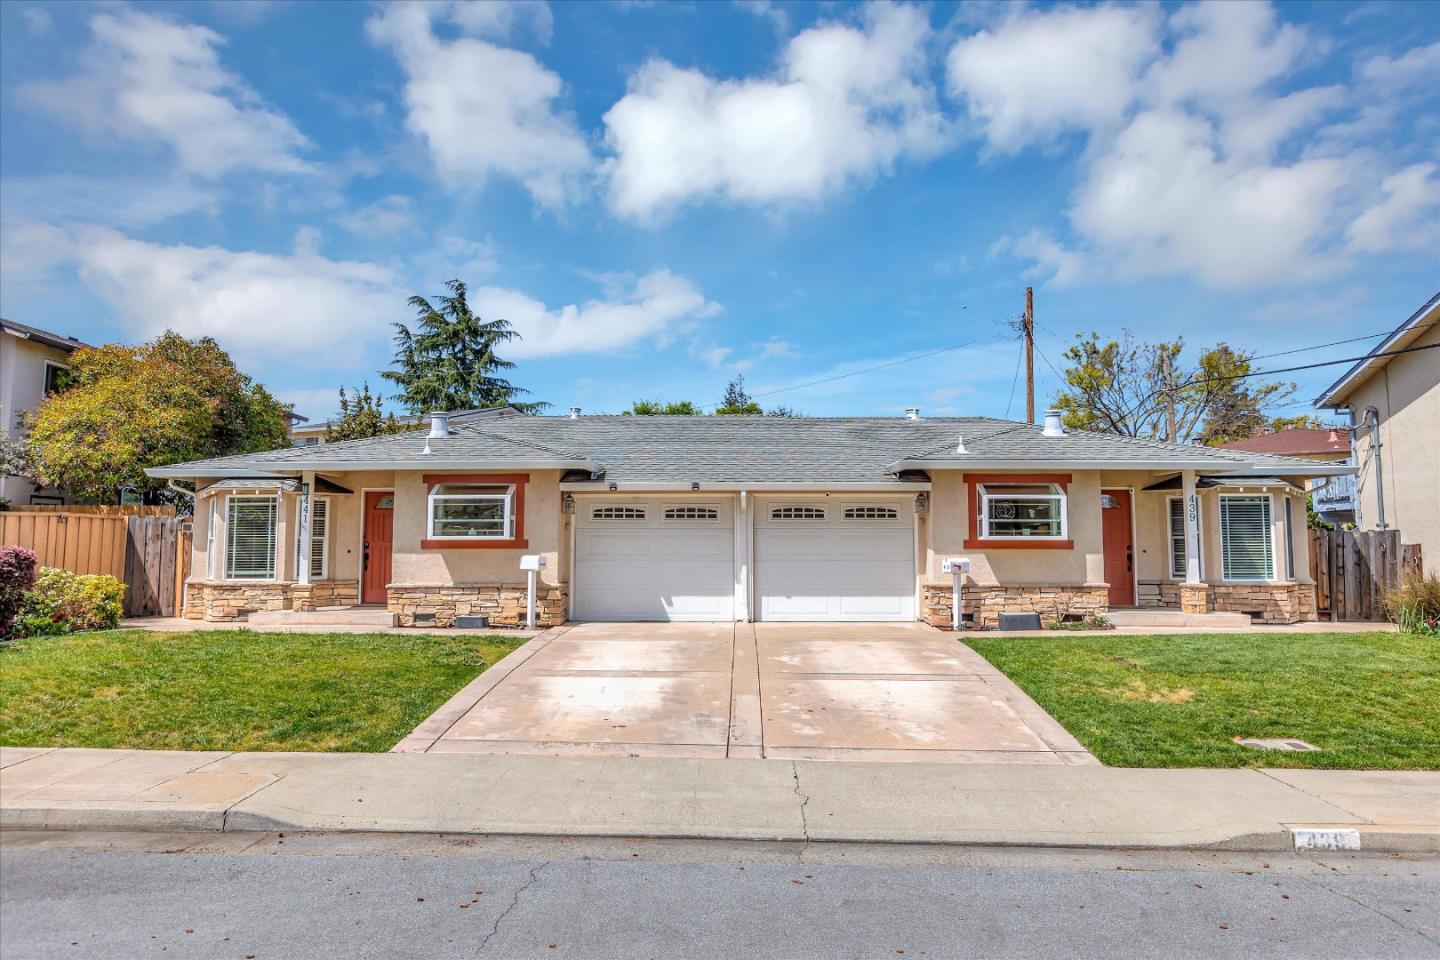 Photo of 439-& 441 Carneros Ave in Sunnyvale, CA